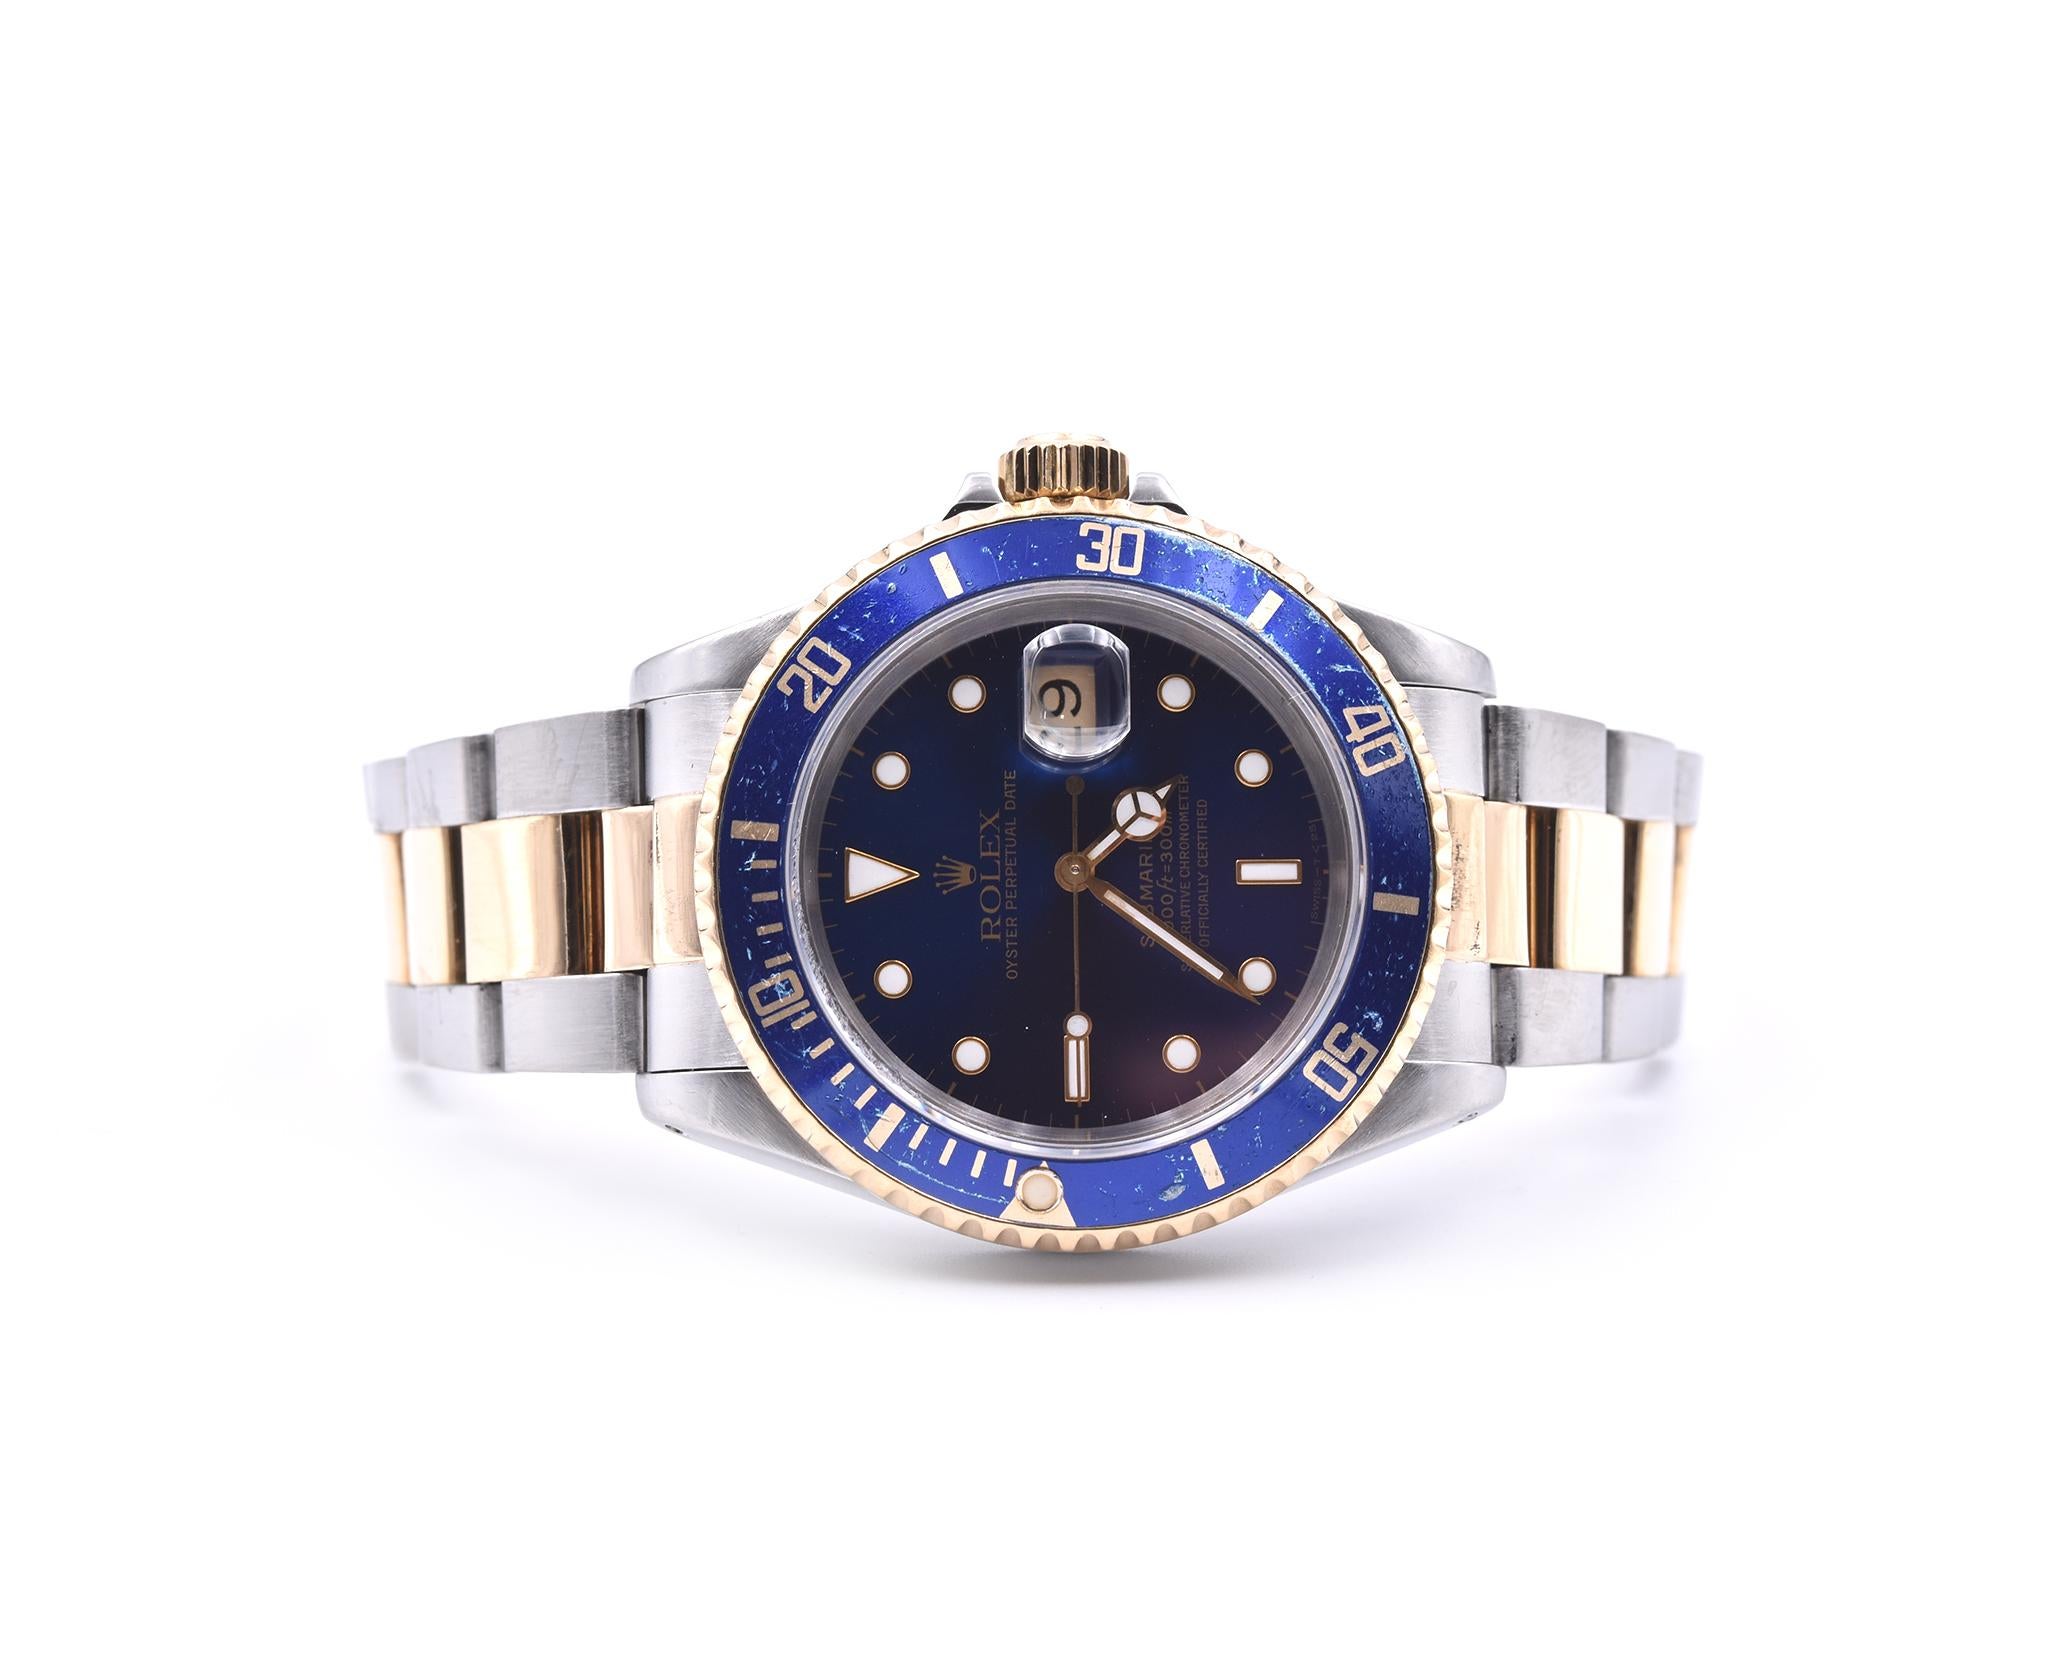 Rolex Two-Tone Submariner with Blue Dial/Bezel Watch Ref. 5947 In Excellent Condition In Scottsdale, AZ